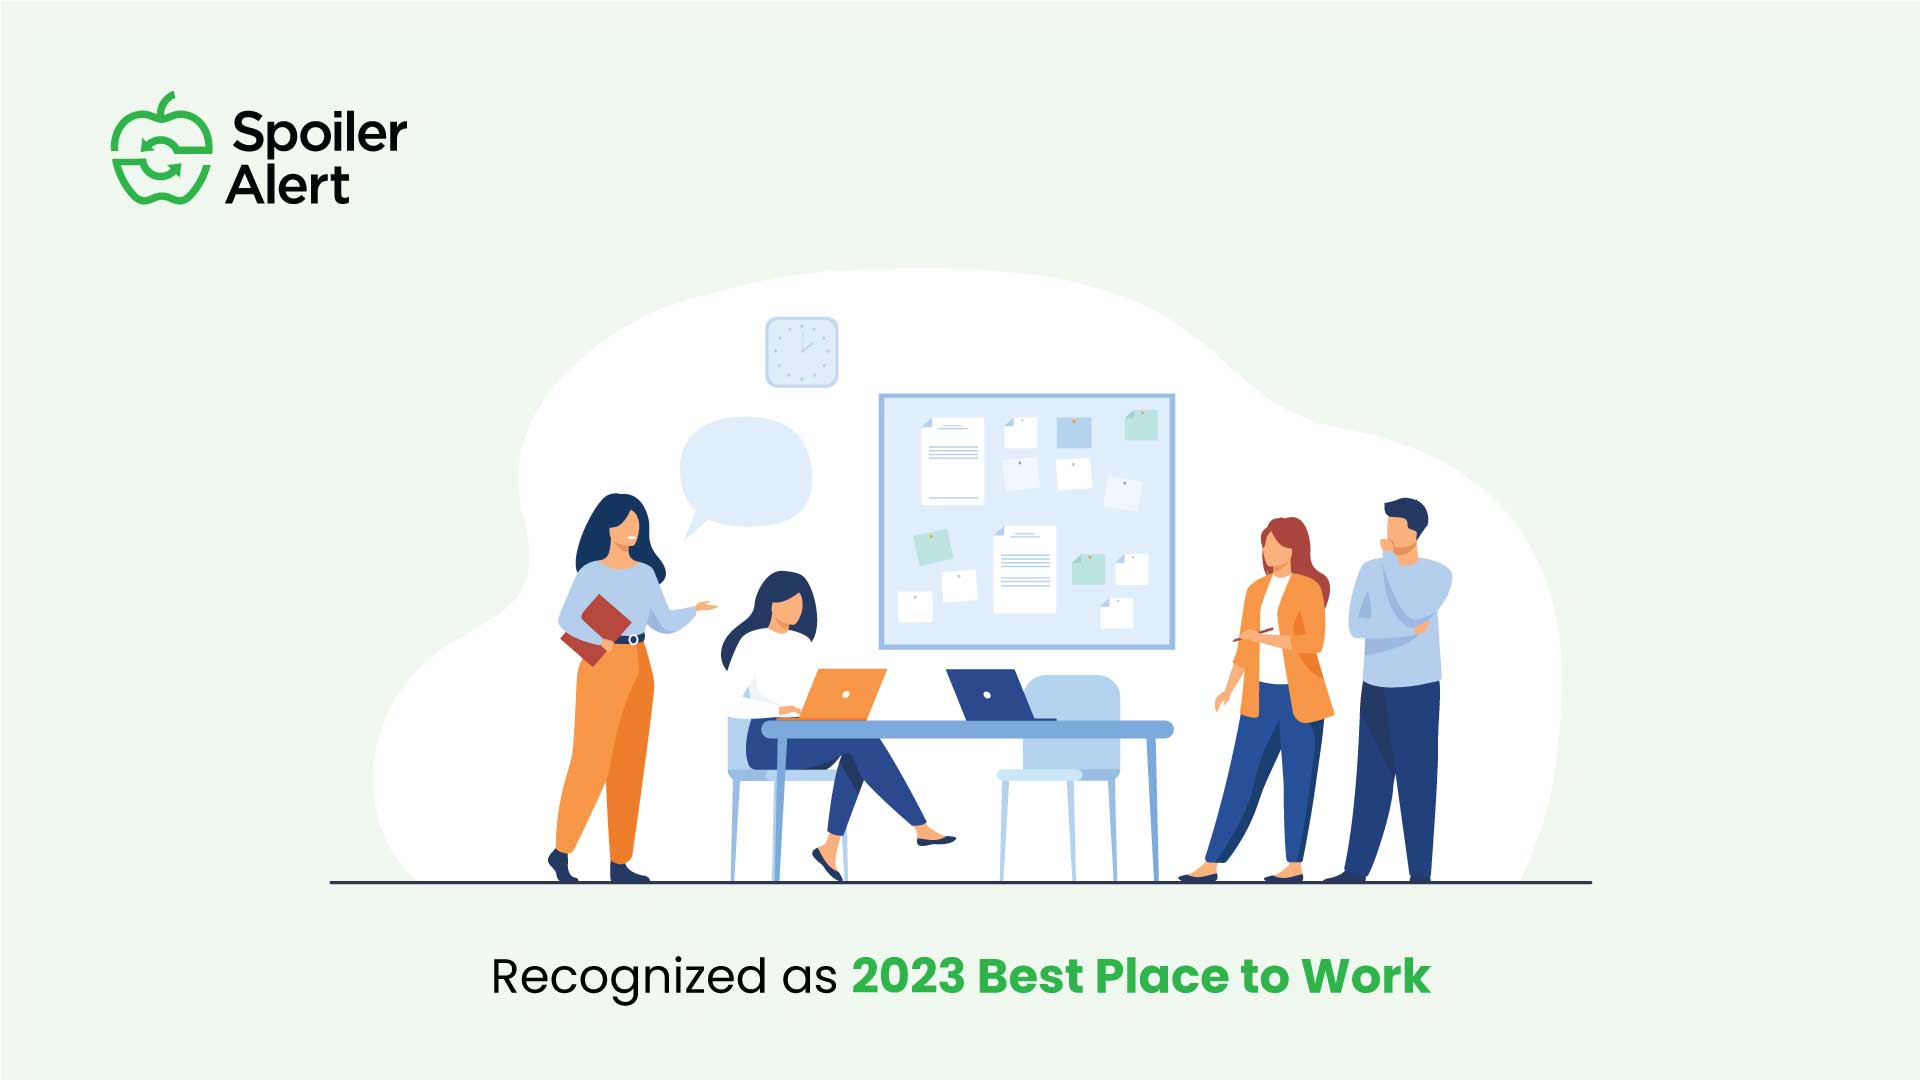 Spoiler Alert recognized as 2023 Best Place to Work